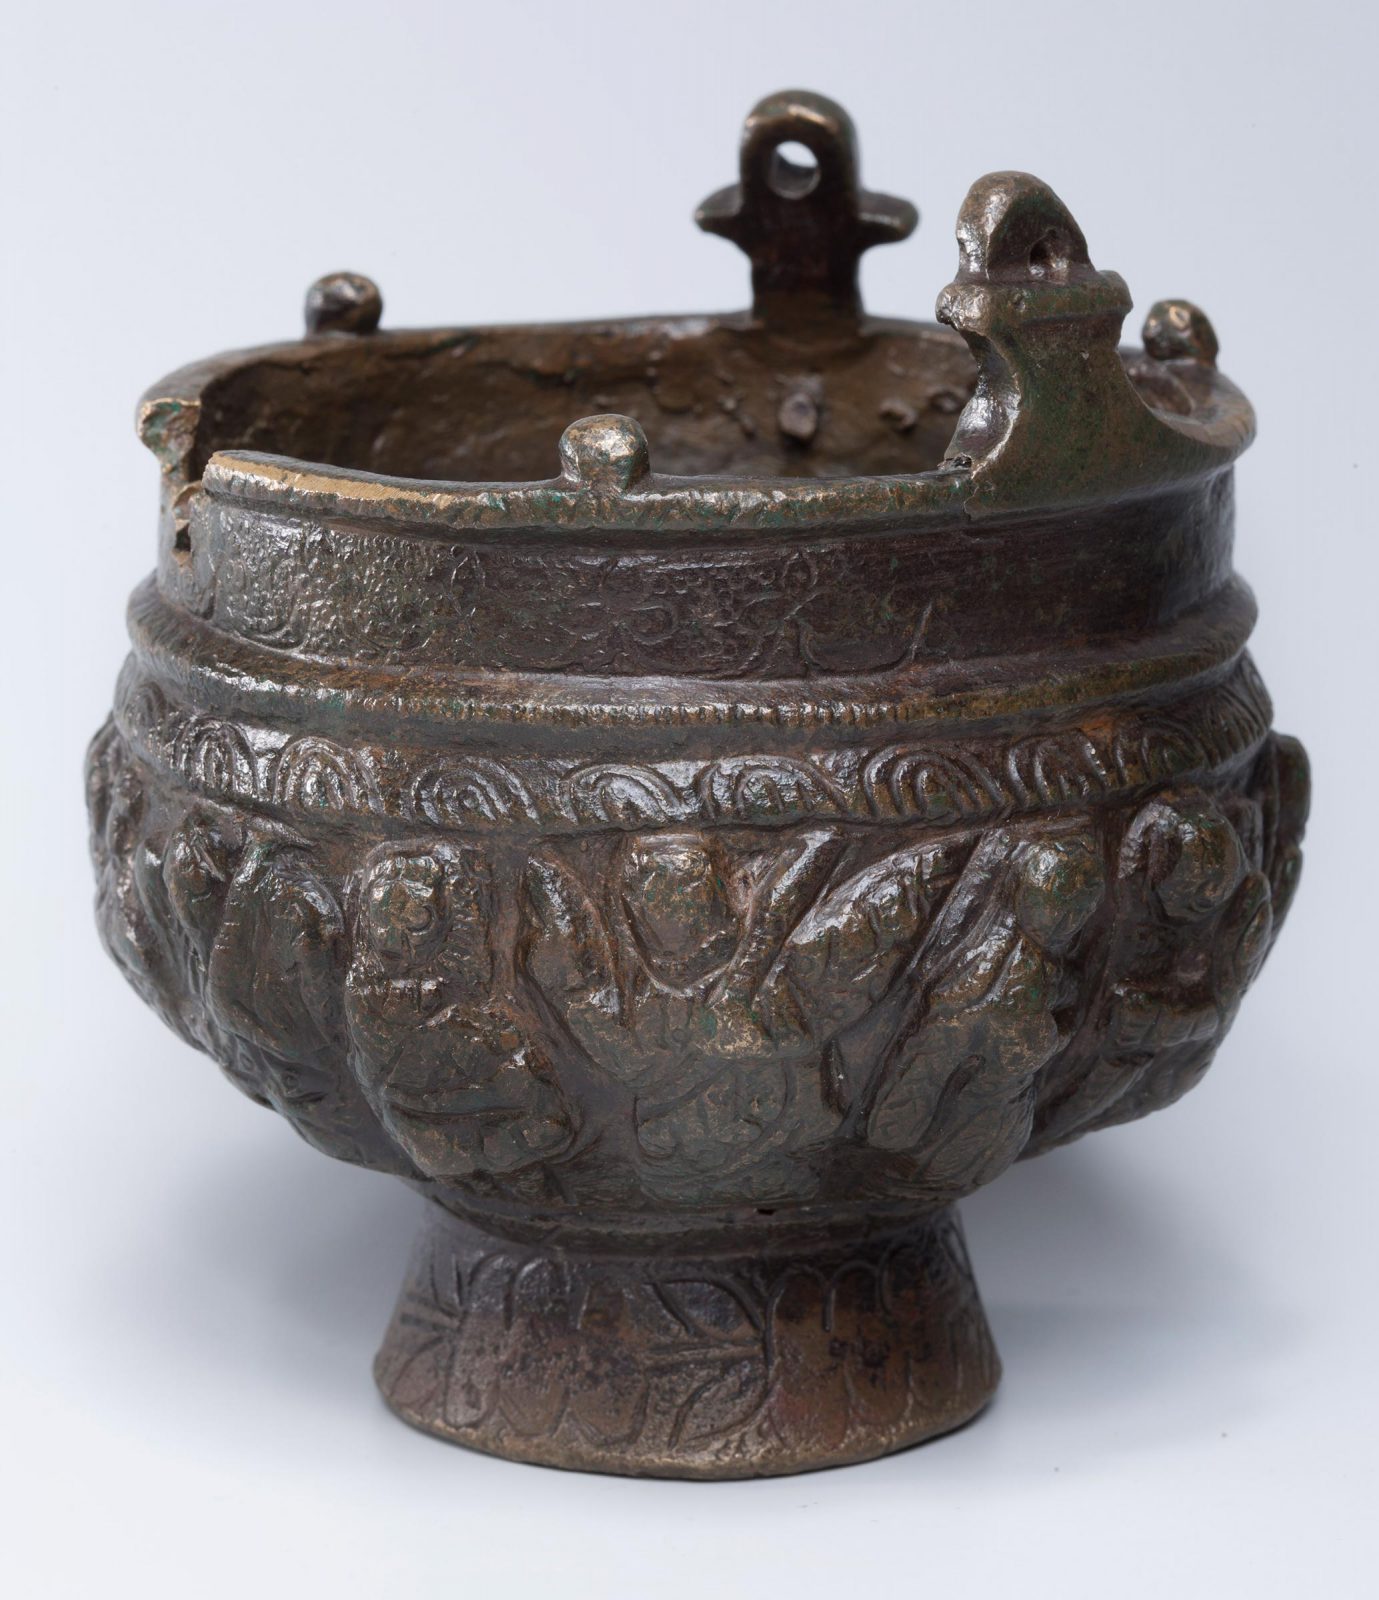 Footed bowl with figures in procession